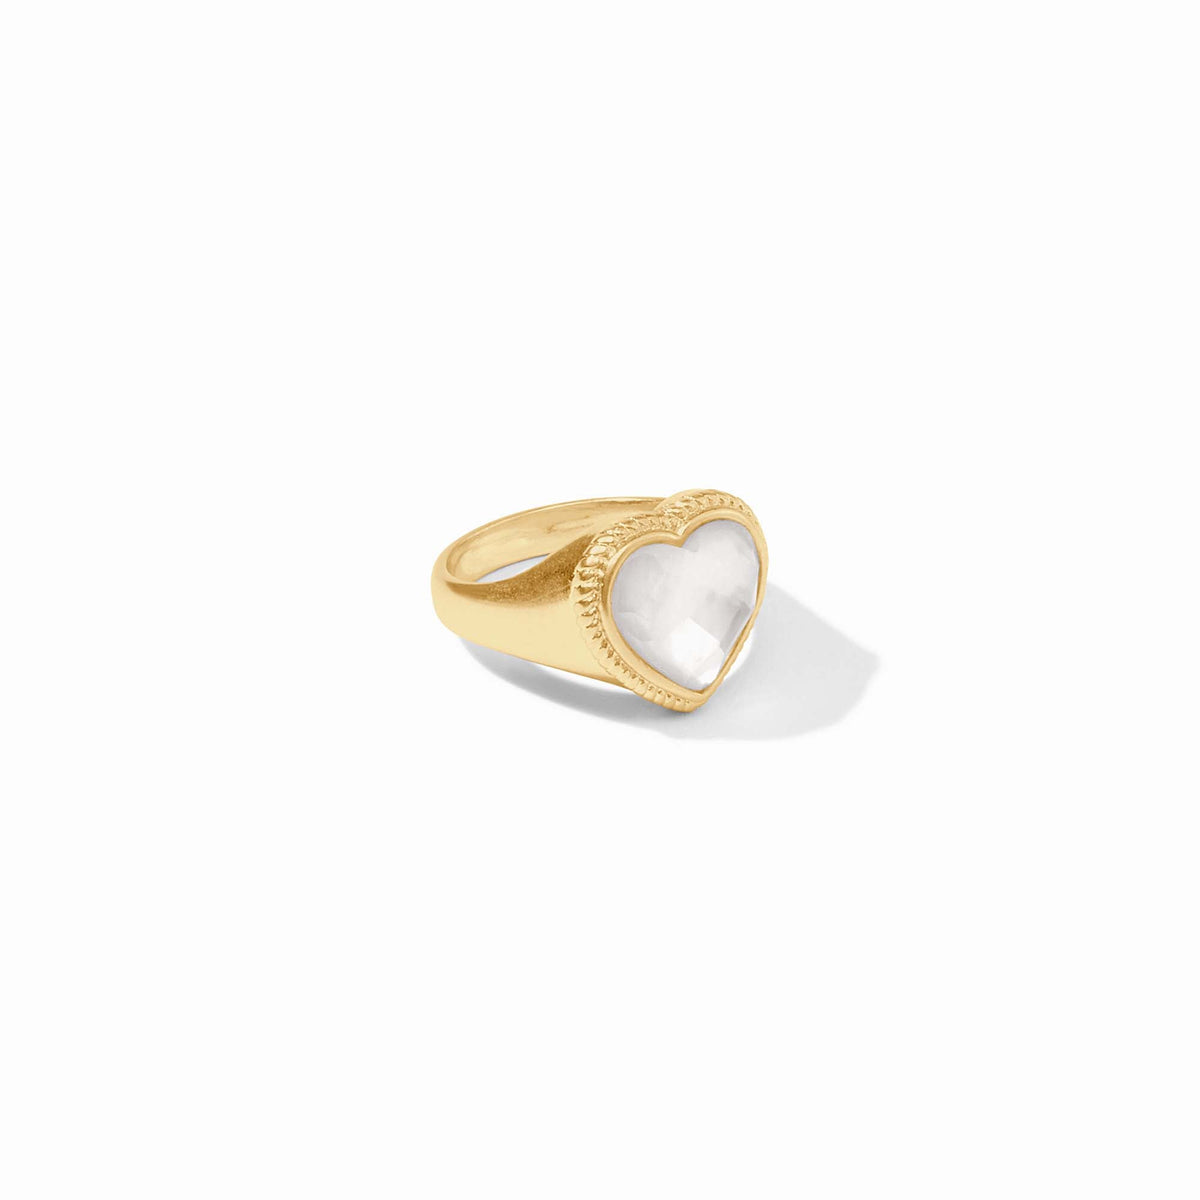 Julie Vos - Heart Signet Ring, Iridescent Clear Crystal / 8